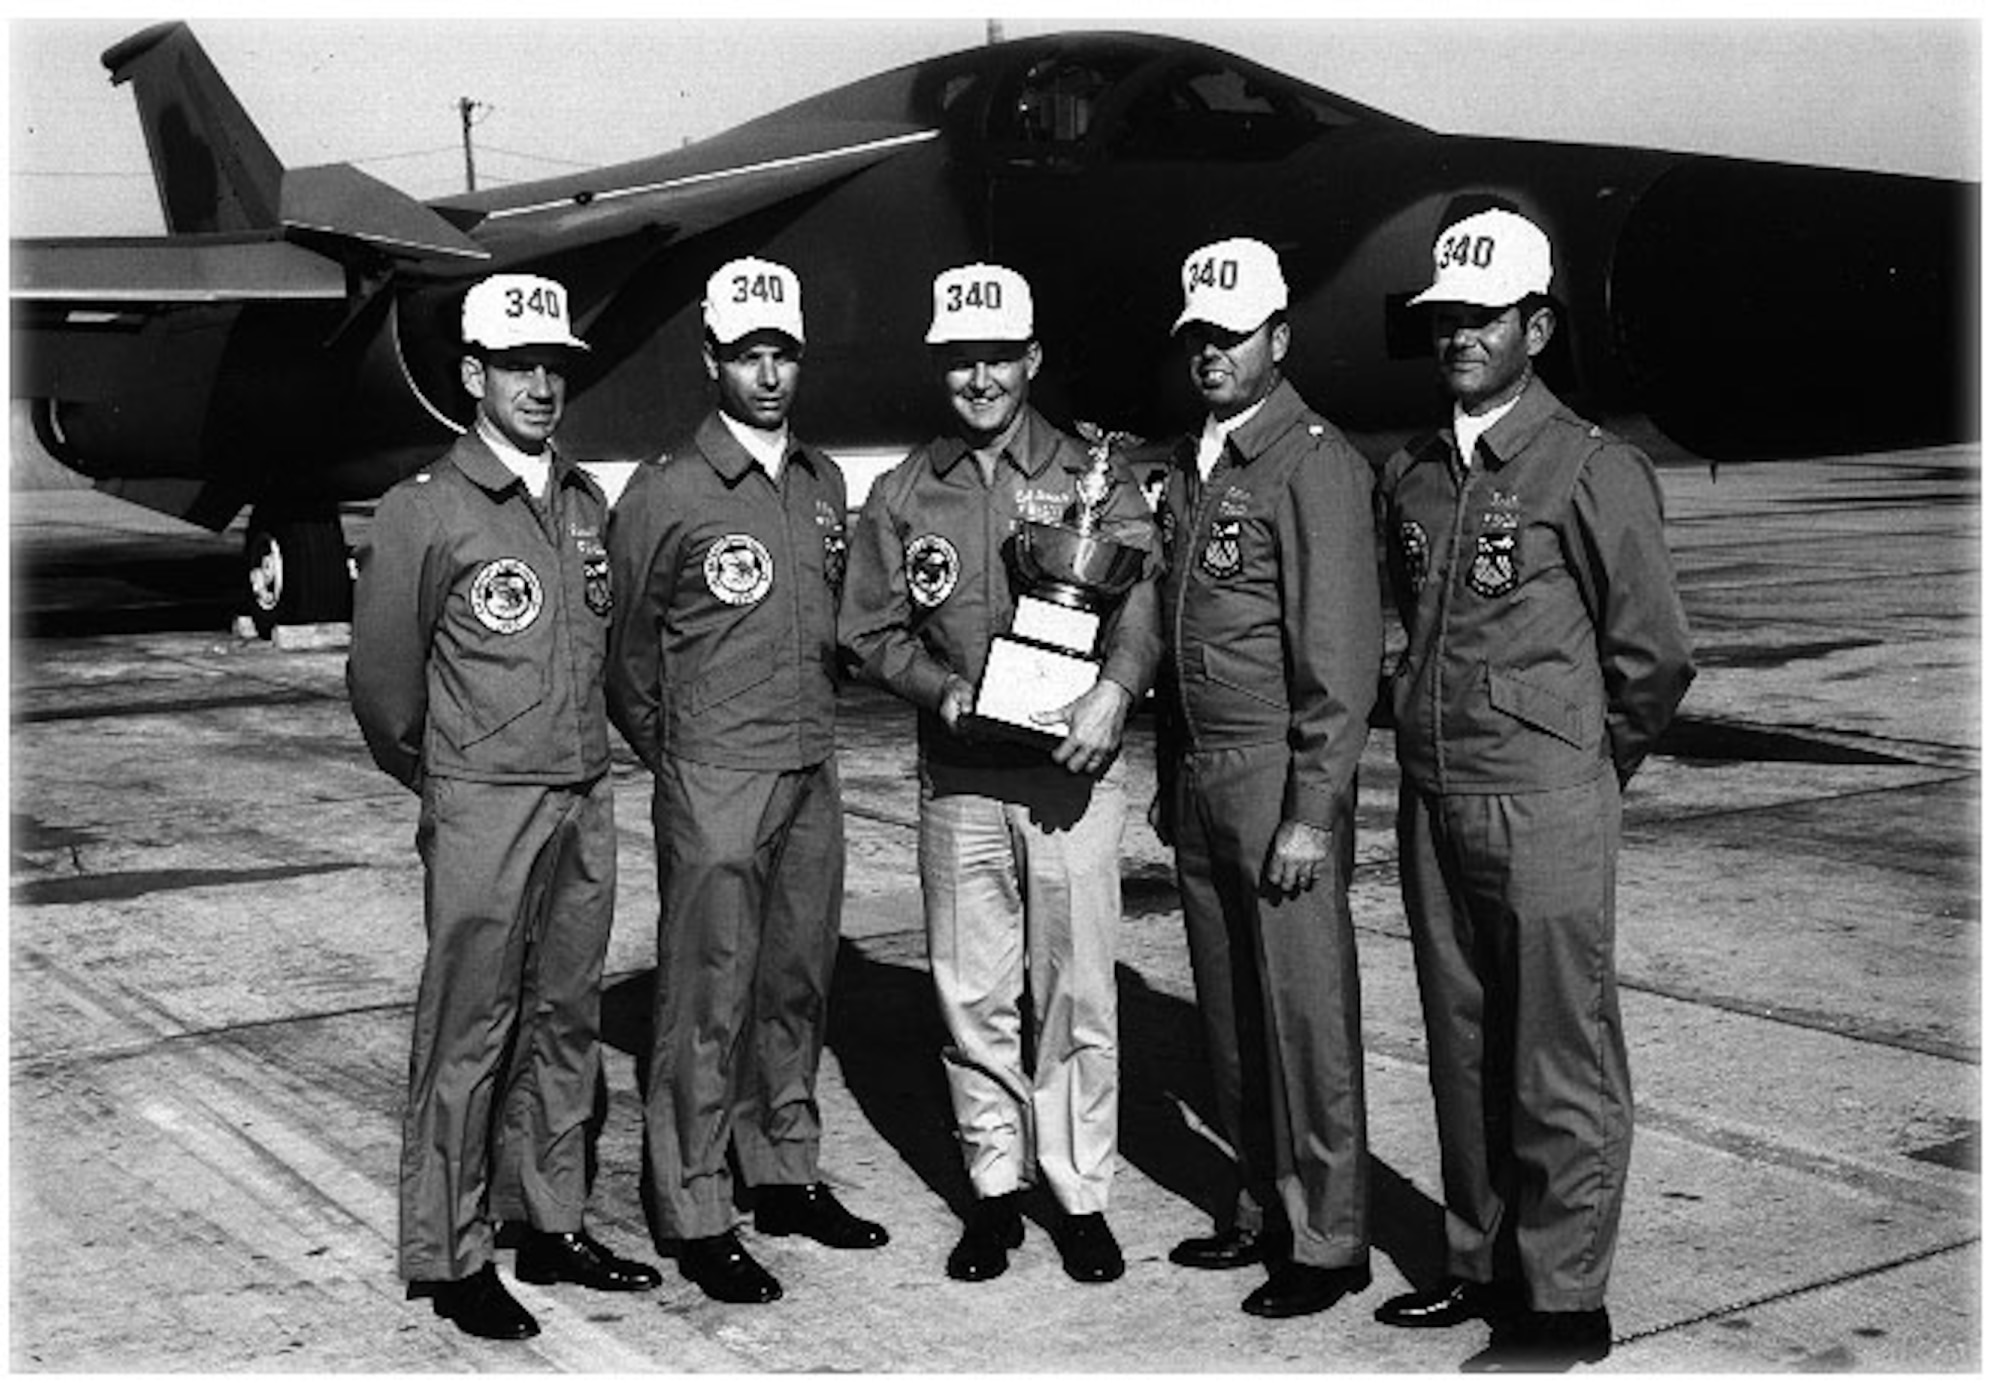 MCCOY AIR FORCE BASE, Fla. - The 17th Bombing and Navigation Competition saw the first appearance of FB-111s; the re-appearance of tanker squadrons; criteria for the Fairchild and Saunders Trophies was changed; and the Mathis Trophy was awarded for the first time. The best bombing honors went to the 340th Bomb Group's, from Carswell Air Force Base, Texas. The Carswell AFB unit placed second for the Mathis Trophy, awarded to the top bomber unit based on combined results in bombing and navigation, and second for the Navigation Trophy. Accepting the trophy in 1970 are (left to right) Lt. Col. R. S. Russell; Maj. A. R. Ely; Col. K. J. Green, 340th BG commander; Lt. Col. J. S. Lothar and Maj. B. R. Seals. (Courtesy photo)